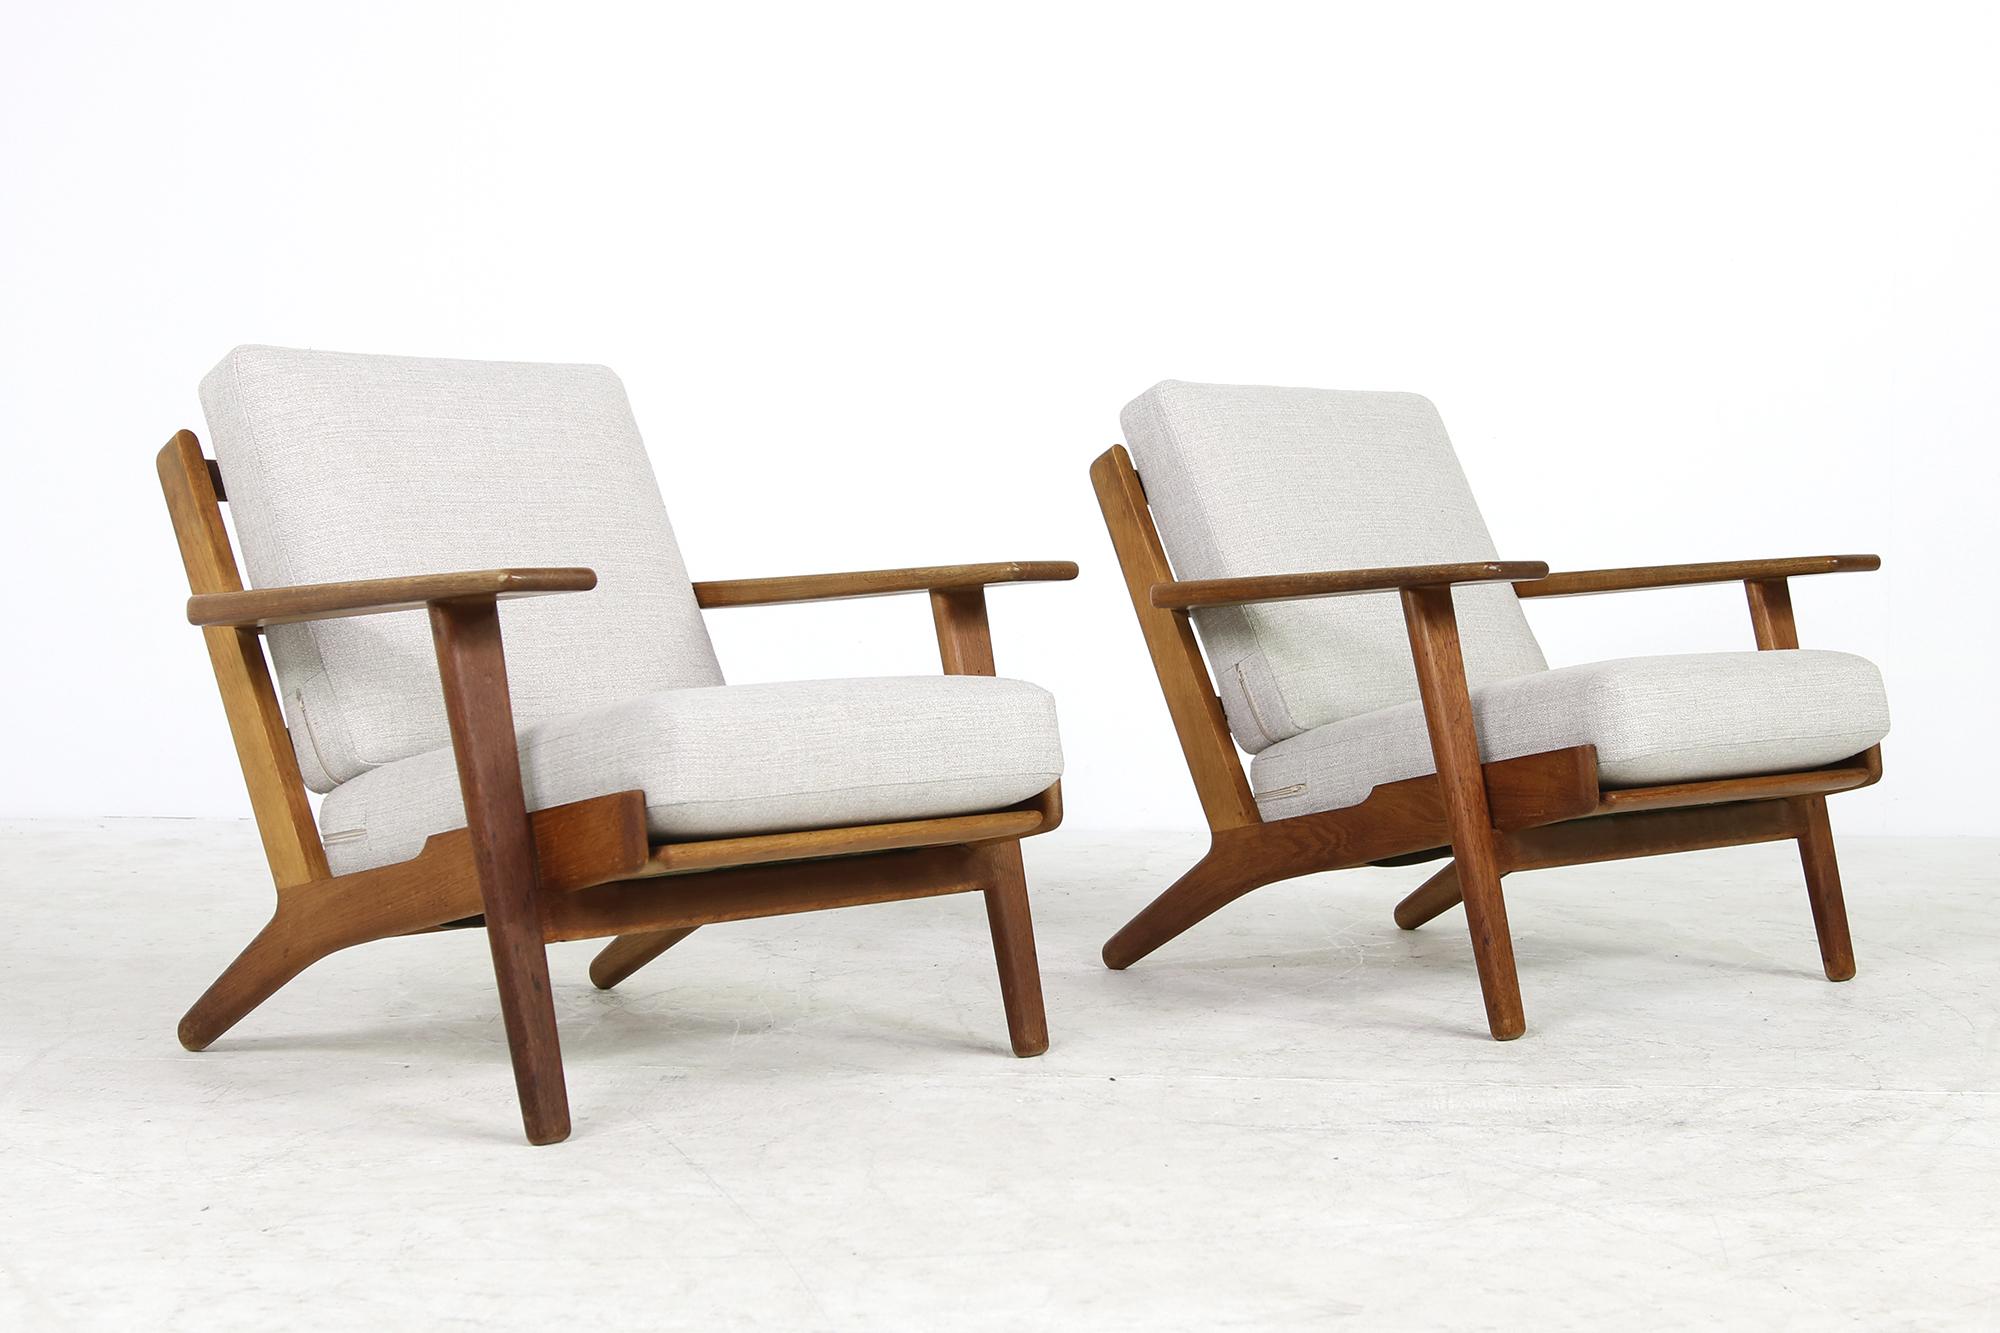 Beautiful pair of Mid-Century Modern Hans Wegner 1960s easy chairs, GETAMA GE 290 early edition, not the newer production.
New upholstery in best condition, covered with soft woven fabric in light grey.
 